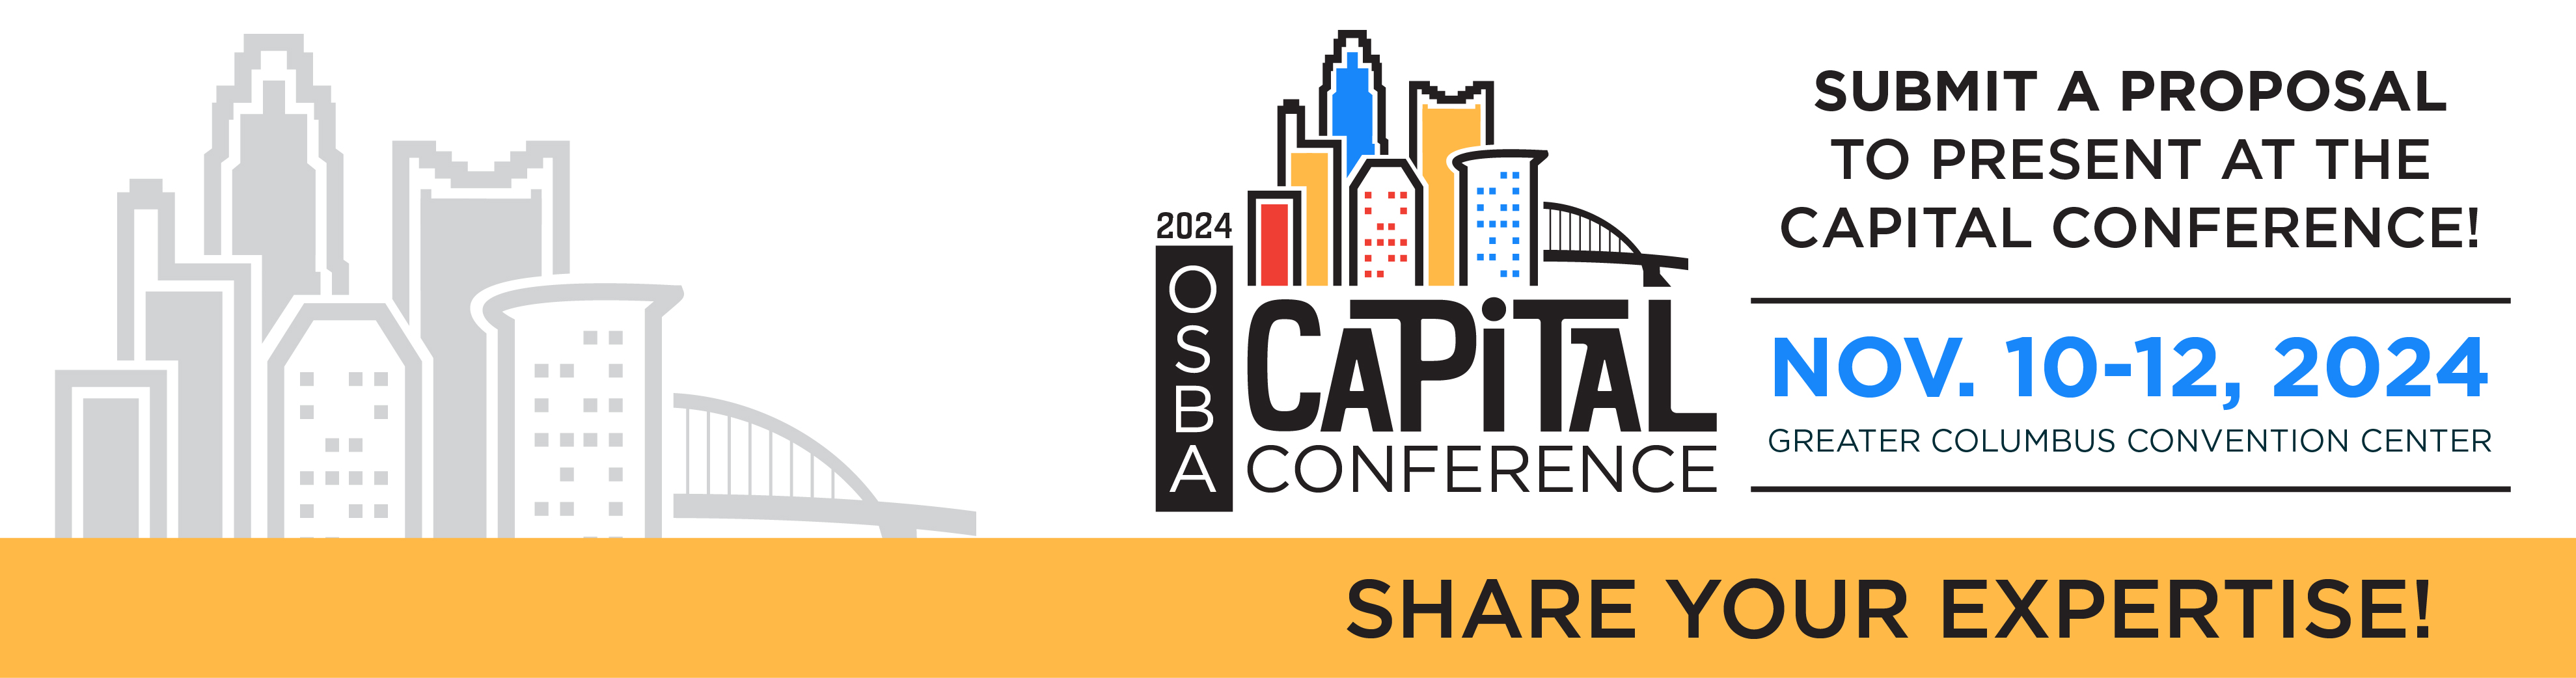 Share your expertise at the 2024 OSBA Capital Conference